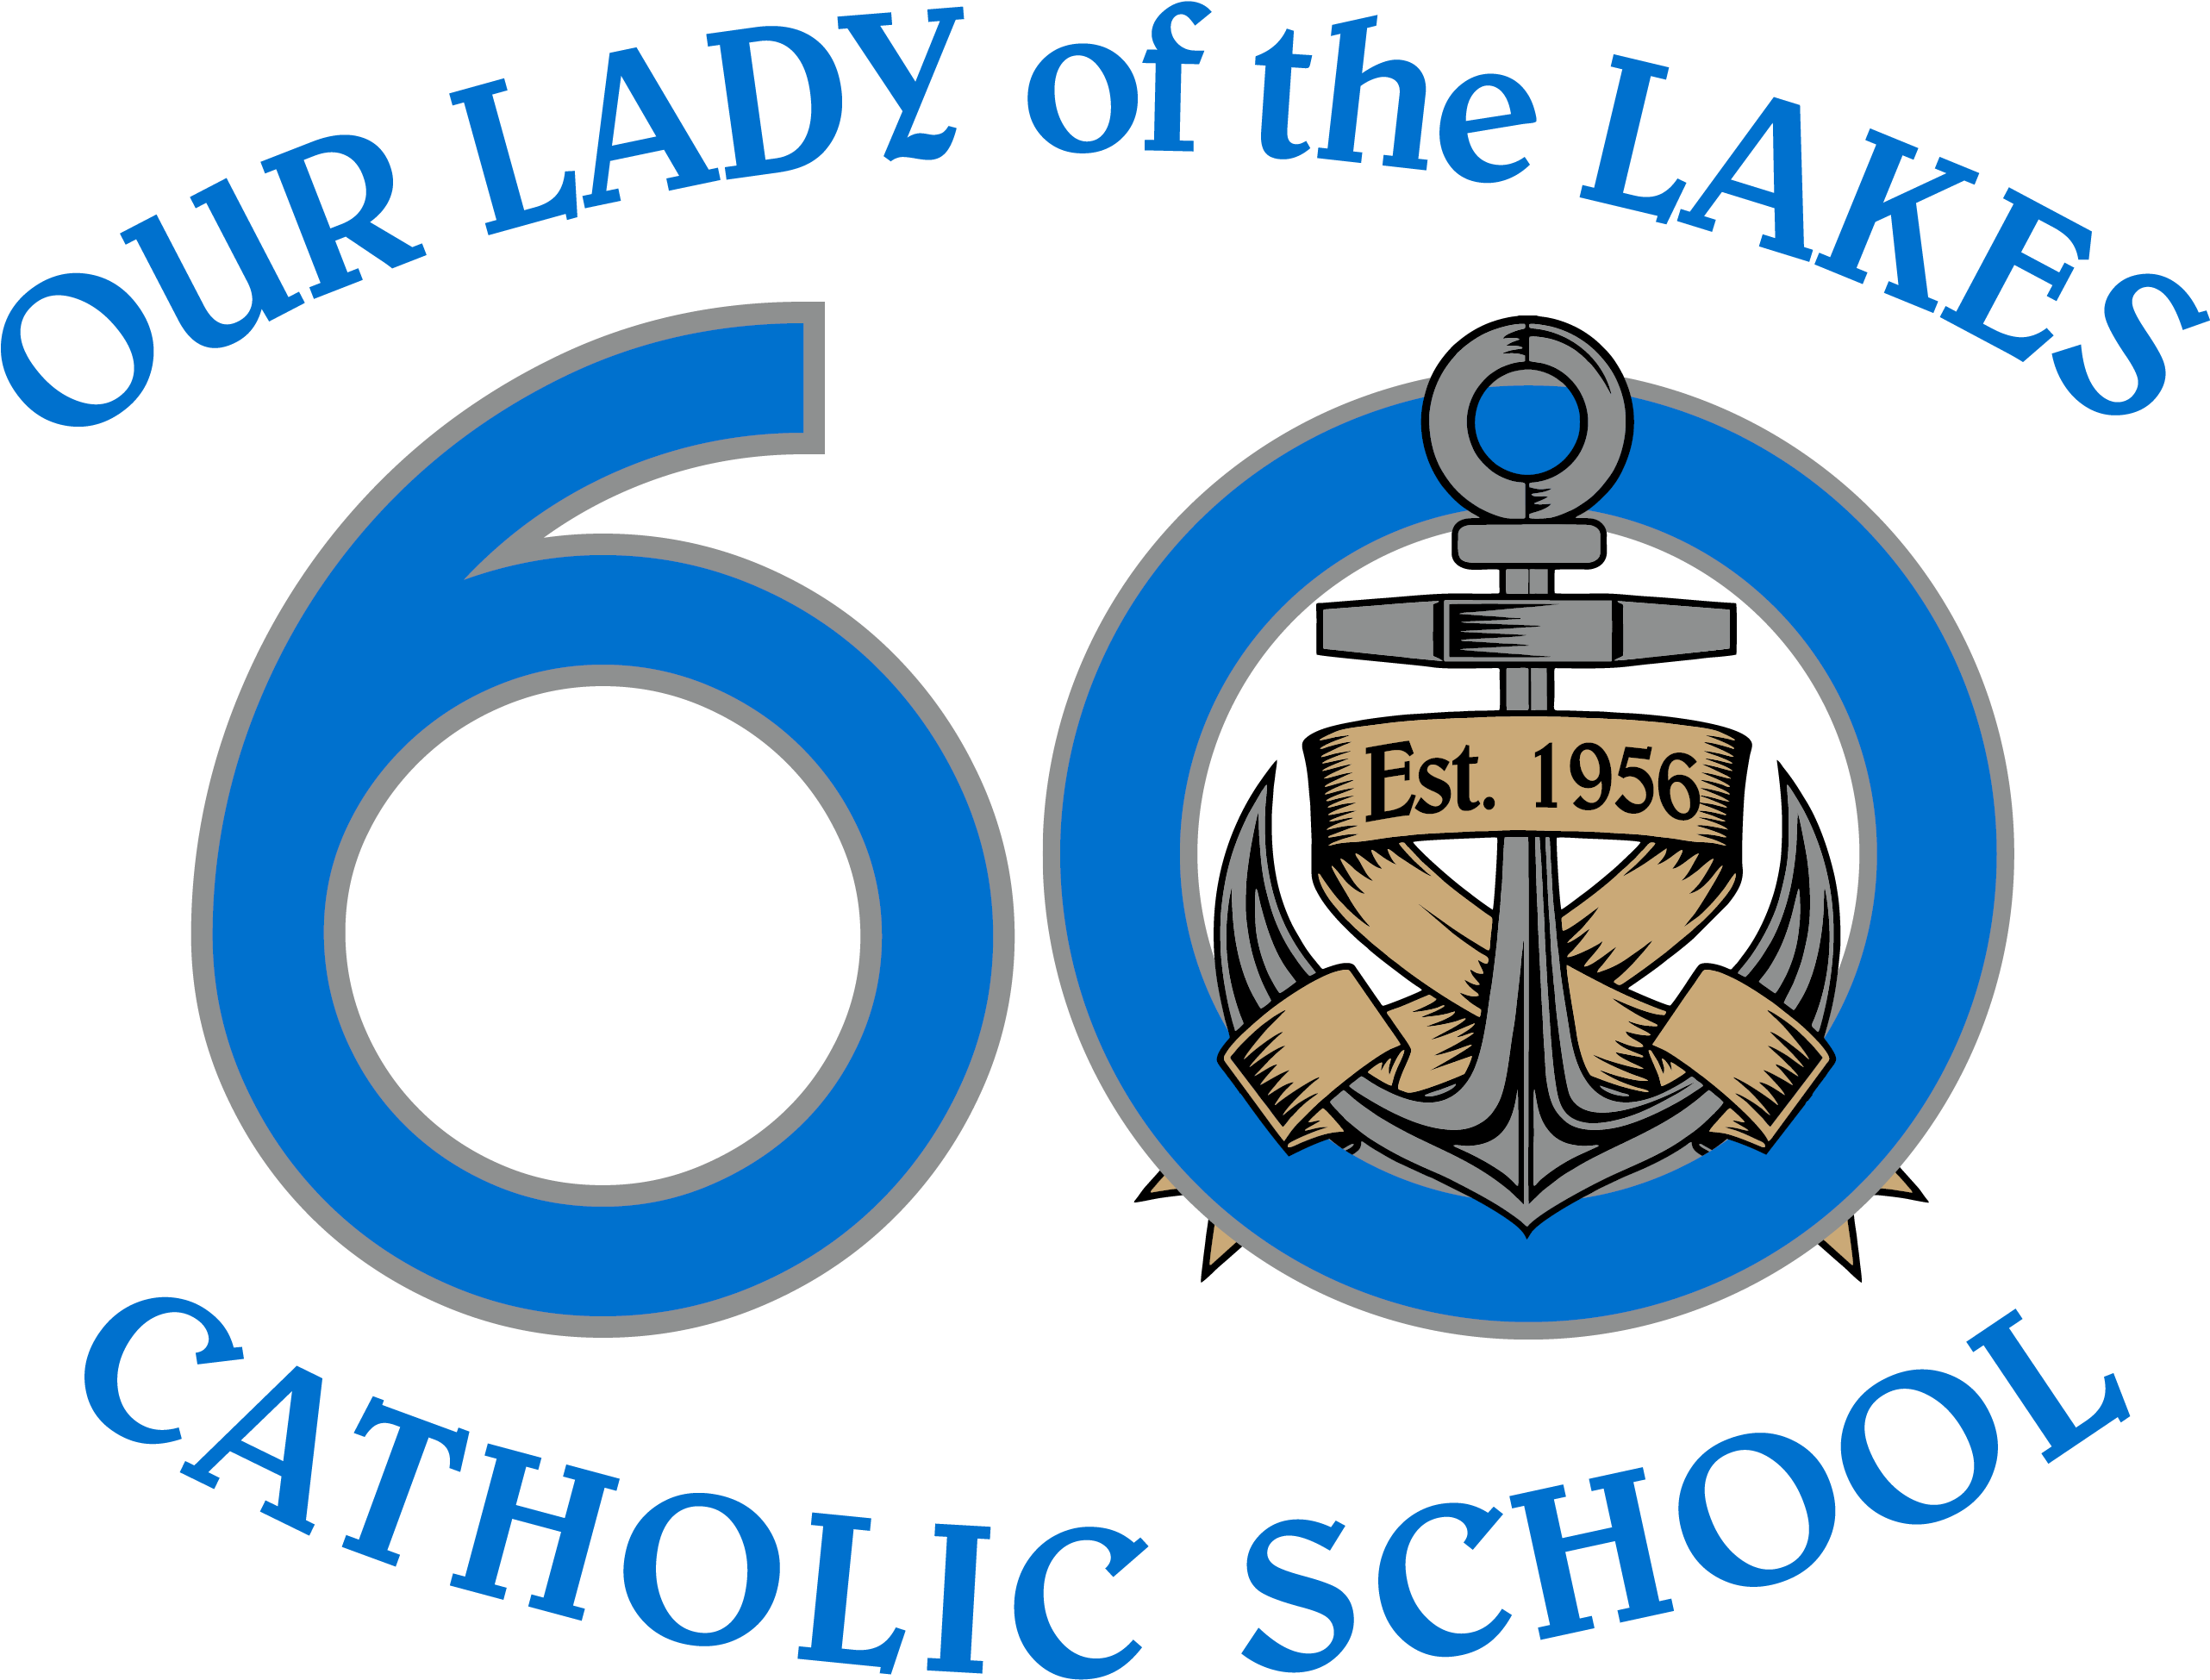 Es Meet The Teachers & Ice Cream Social - Waterford Our Lady Of The Lakes Logo (2700x2100)